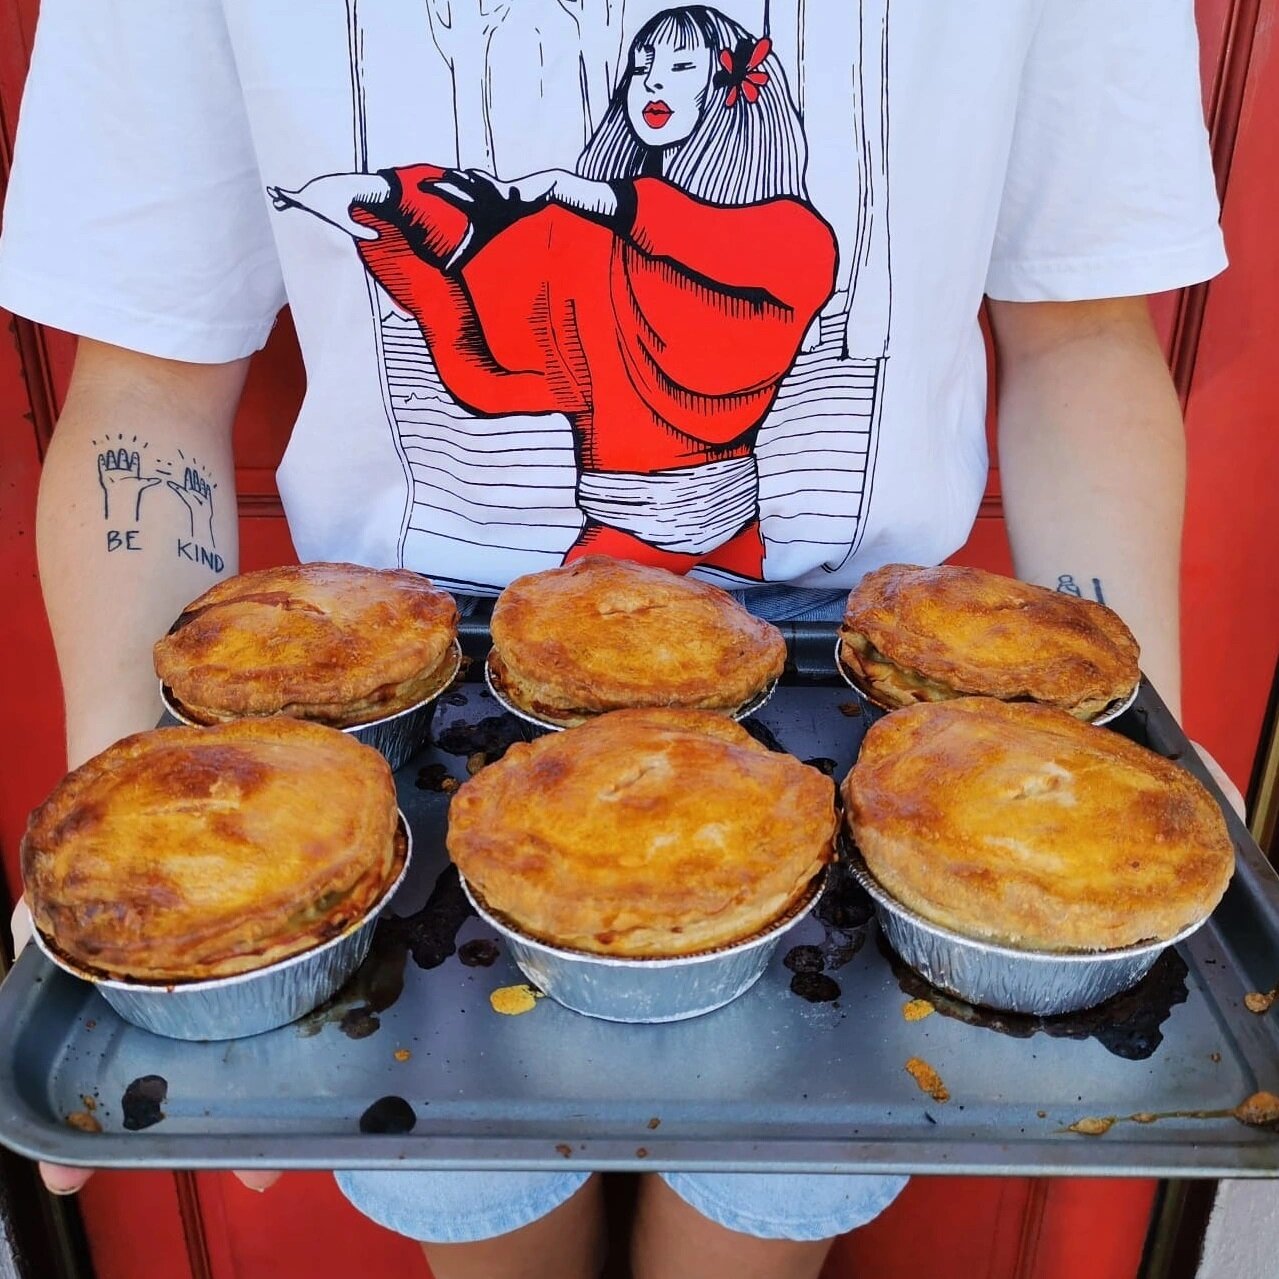 💃 KATE BUSH SAYS GO BUY PIE 💃

AND GUESS WHAT?????!!!!!!
I've finally added VEGAN PIIIIIIE 🎉🤯🥳 

Yes my vegan beauties welcome to my world of pie, have a seat and get stuck in 🥰

Swipe for updated menu ➡️

3 and 6 pick-a-mix Pie Packs now avail